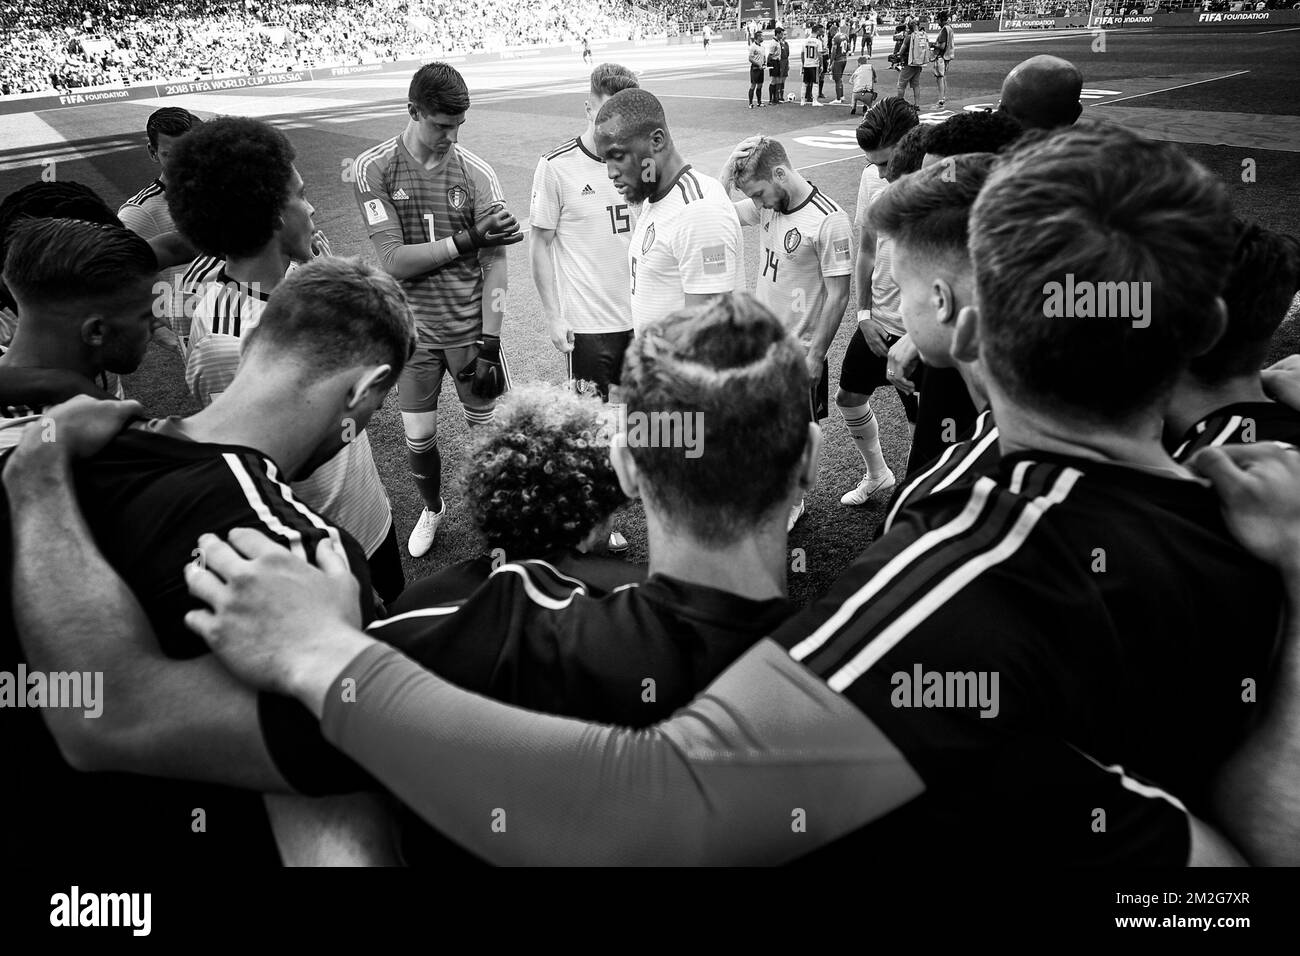 Belgium's players pictured at the start of the second game of Belgian national soccer team the Red Devils against Tunisia national team in the Spartak stadium, in Moscow, Russia, Saturday 23 June 2018. Belgium won its first group phase game. BELGA PHOTO BRUNO FAHY Stock Photo